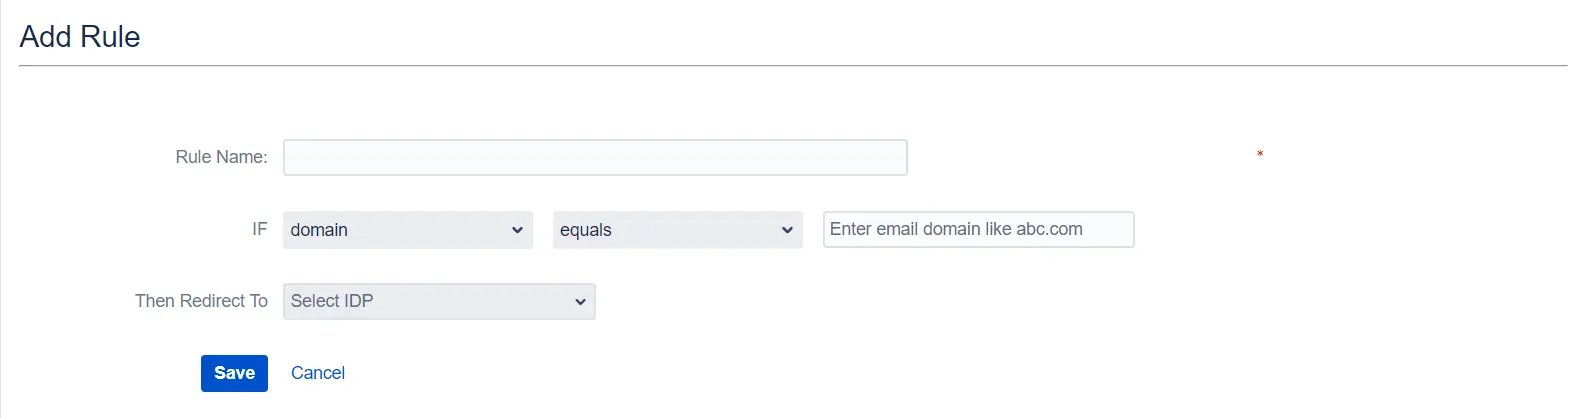 OAuth / OpenID Single Sign On (SSO) into Jira, Add Rule window in the Redirection Rules tab